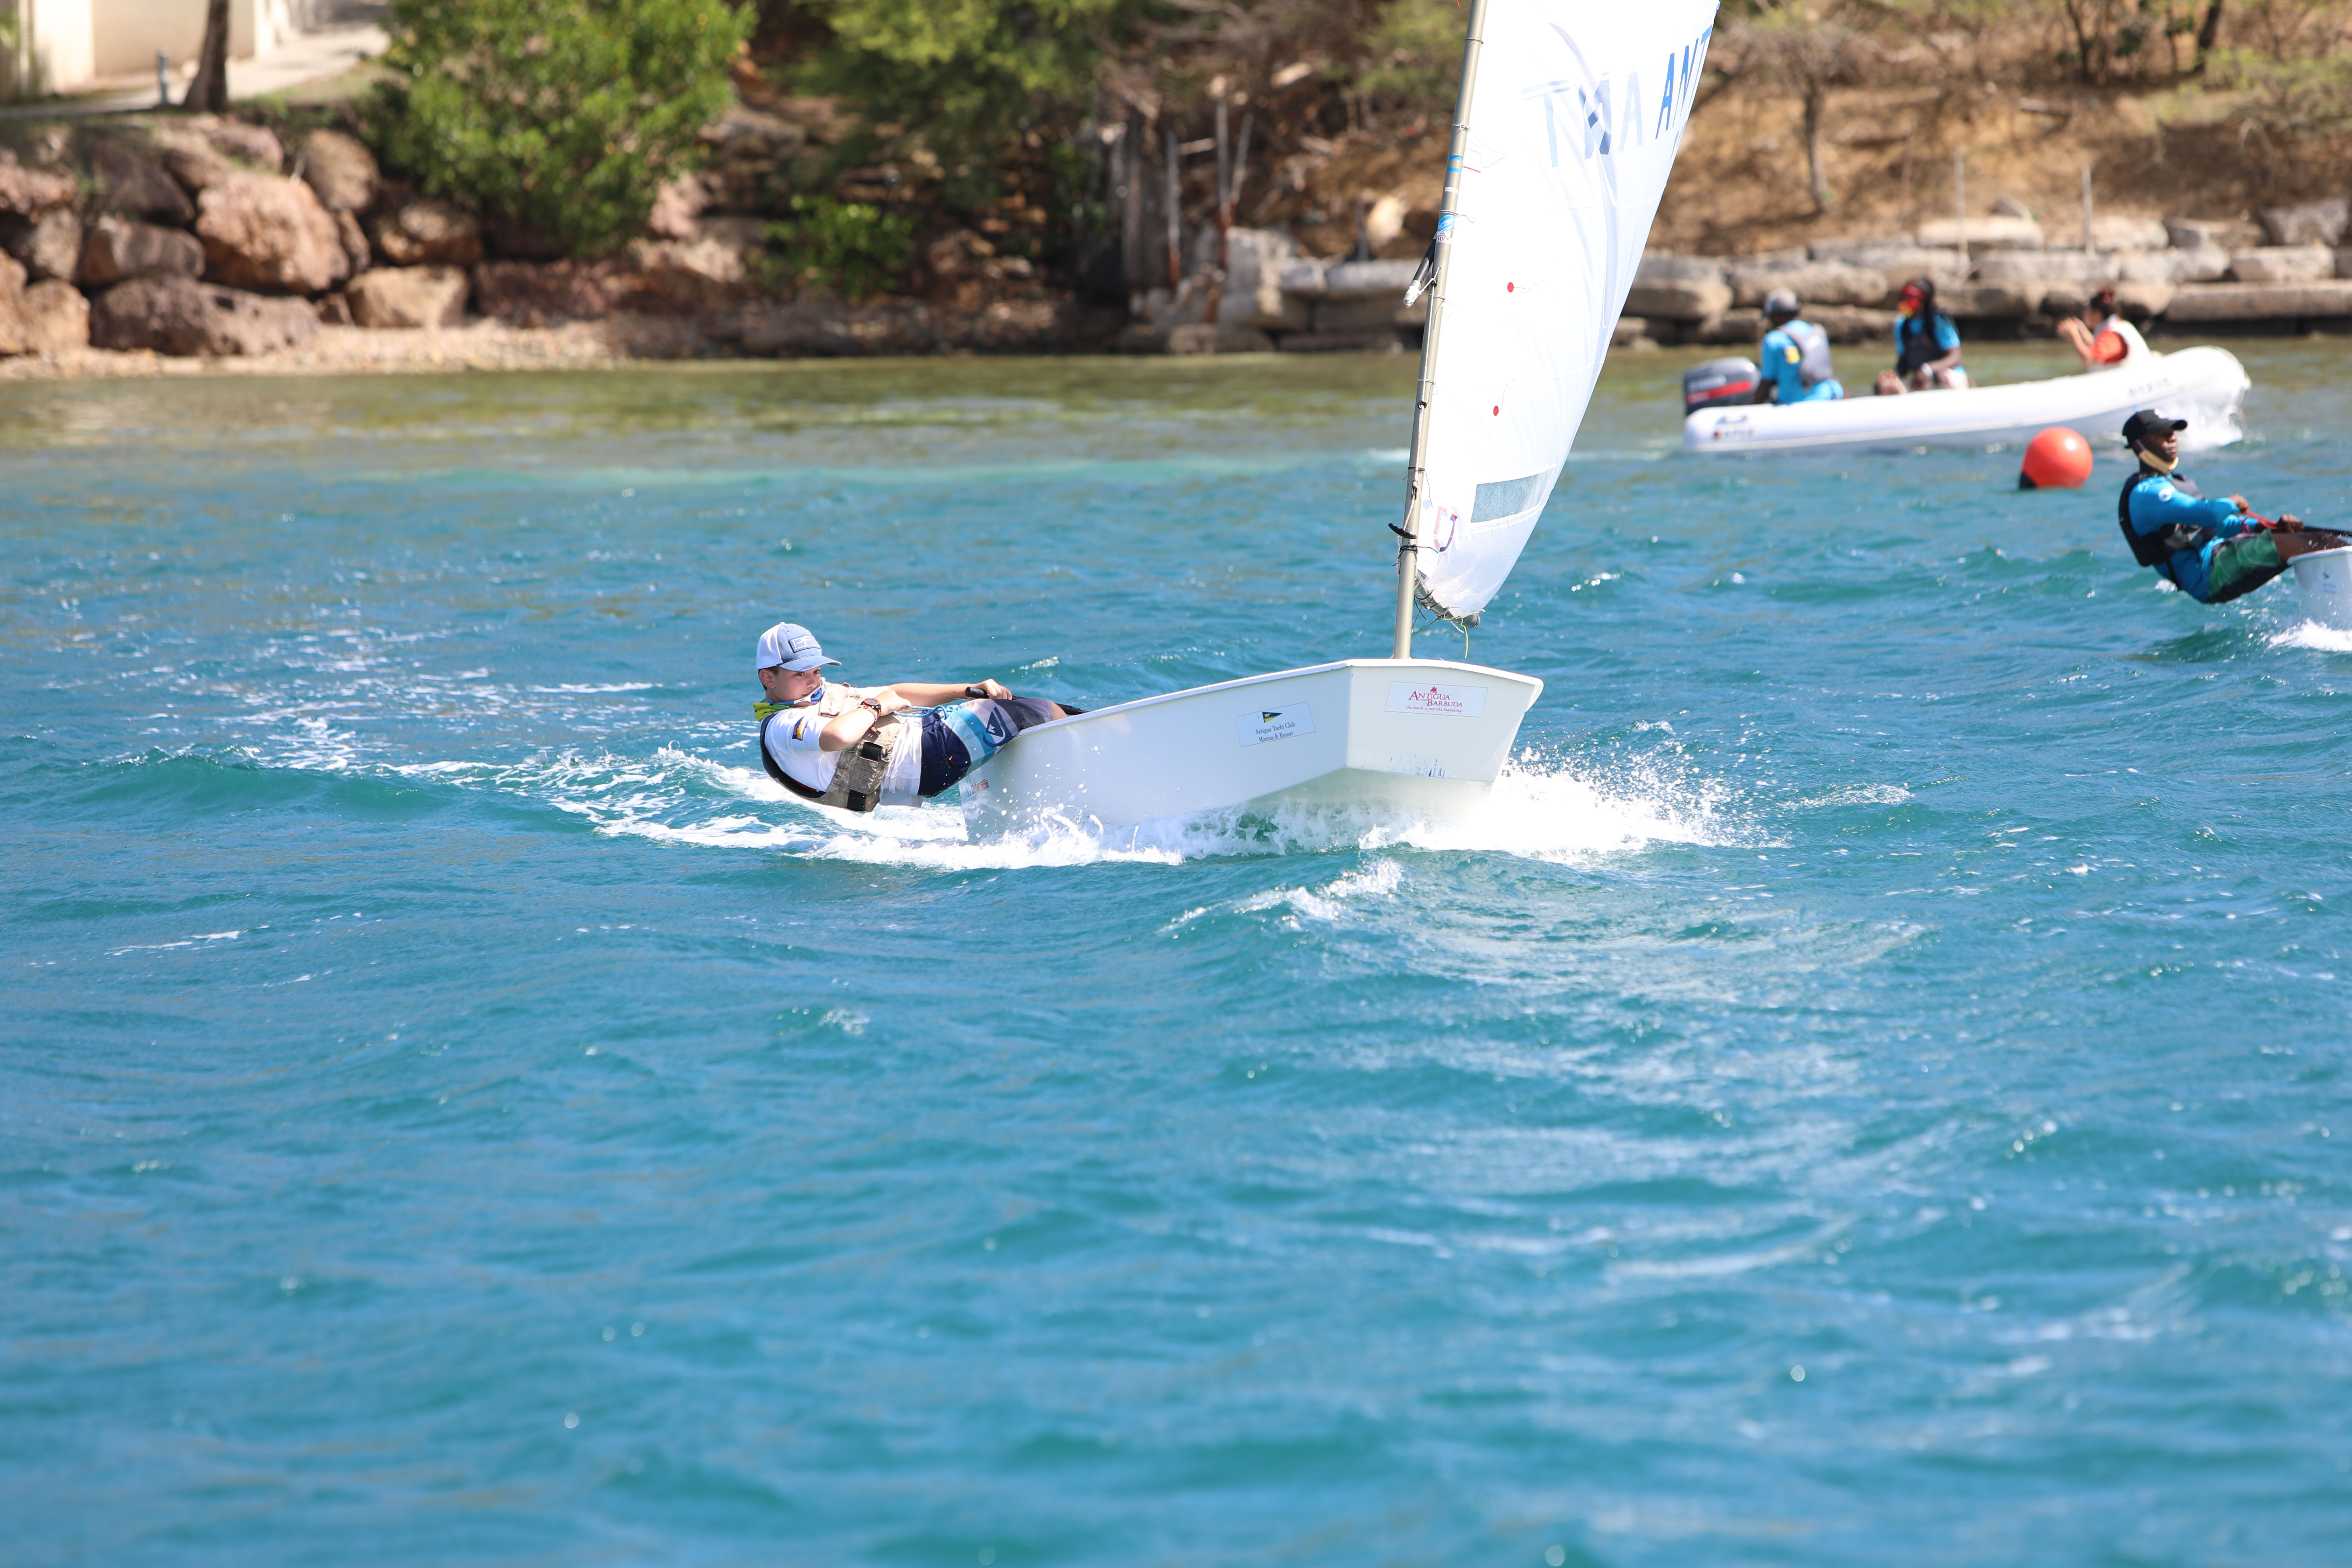 Sept, Oct, November Youth Sailing Program Schedules